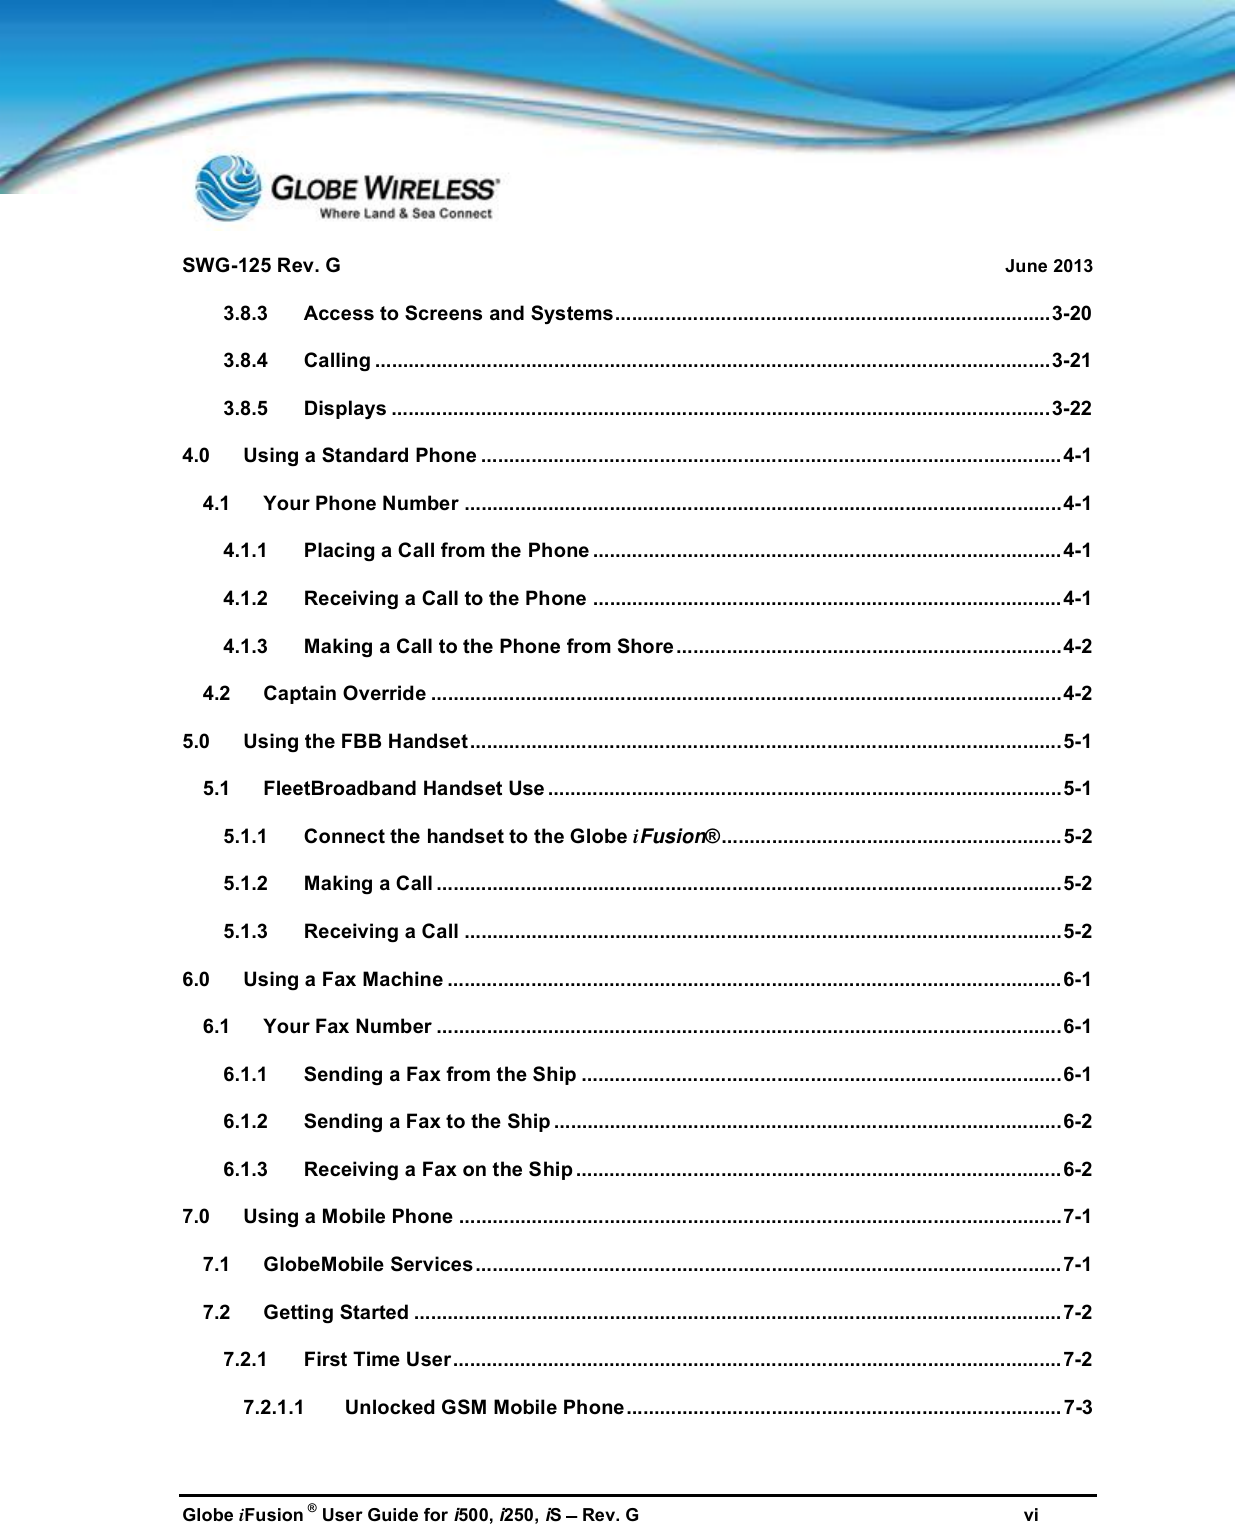 SWG-125 Rev. G June 2013Globe iFusion ®User Guide for i500, i250, iSRev. G vi3.8.3 Access to Screens and Systems..............................................................................3-203.8.4 Calling .........................................................................................................................3-213.8.5 Displays ......................................................................................................................3-224.0 Using a Standard Phone ........................................................................................................4-14.1 Your Phone Number ...........................................................................................................4-14.1.1 Placing a Call from the Phone ....................................................................................4-14.1.2 Receiving a Call to the Phone ....................................................................................4-14.1.3 Making a Call to the Phone from Shore .....................................................................4-24.2 Captain Override .................................................................................................................4-25.0 Using the FBB Handset..........................................................................................................5-15.1 FleetBroadband Handset Use ............................................................................................5-15.1.1 Connect the handset to the Globe iFusion®............................................................. 5-25.1.2 Making a Call ................................................................................................................5-25.1.3 Receiving a Call ...........................................................................................................5-26.0 Using a Fax Machine .............................................................................................................. 6-16.1 Your Fax Number ................................................................................................................6-16.1.1 Sending a Fax from the Ship ......................................................................................6-16.1.2 Sending a Fax to the Ship ...........................................................................................6-26.1.3 Receiving a Fax on the Ship .......................................................................................6-27.0 Using a Mobile Phone ............................................................................................................7-17.1 GlobeMobile Services.........................................................................................................7-17.2 Getting Started ....................................................................................................................7-27.2.1 First Time User............................................................................................................. 7-27.2.1.1 Unlocked GSM Mobile Phone.............................................................................. 7-3